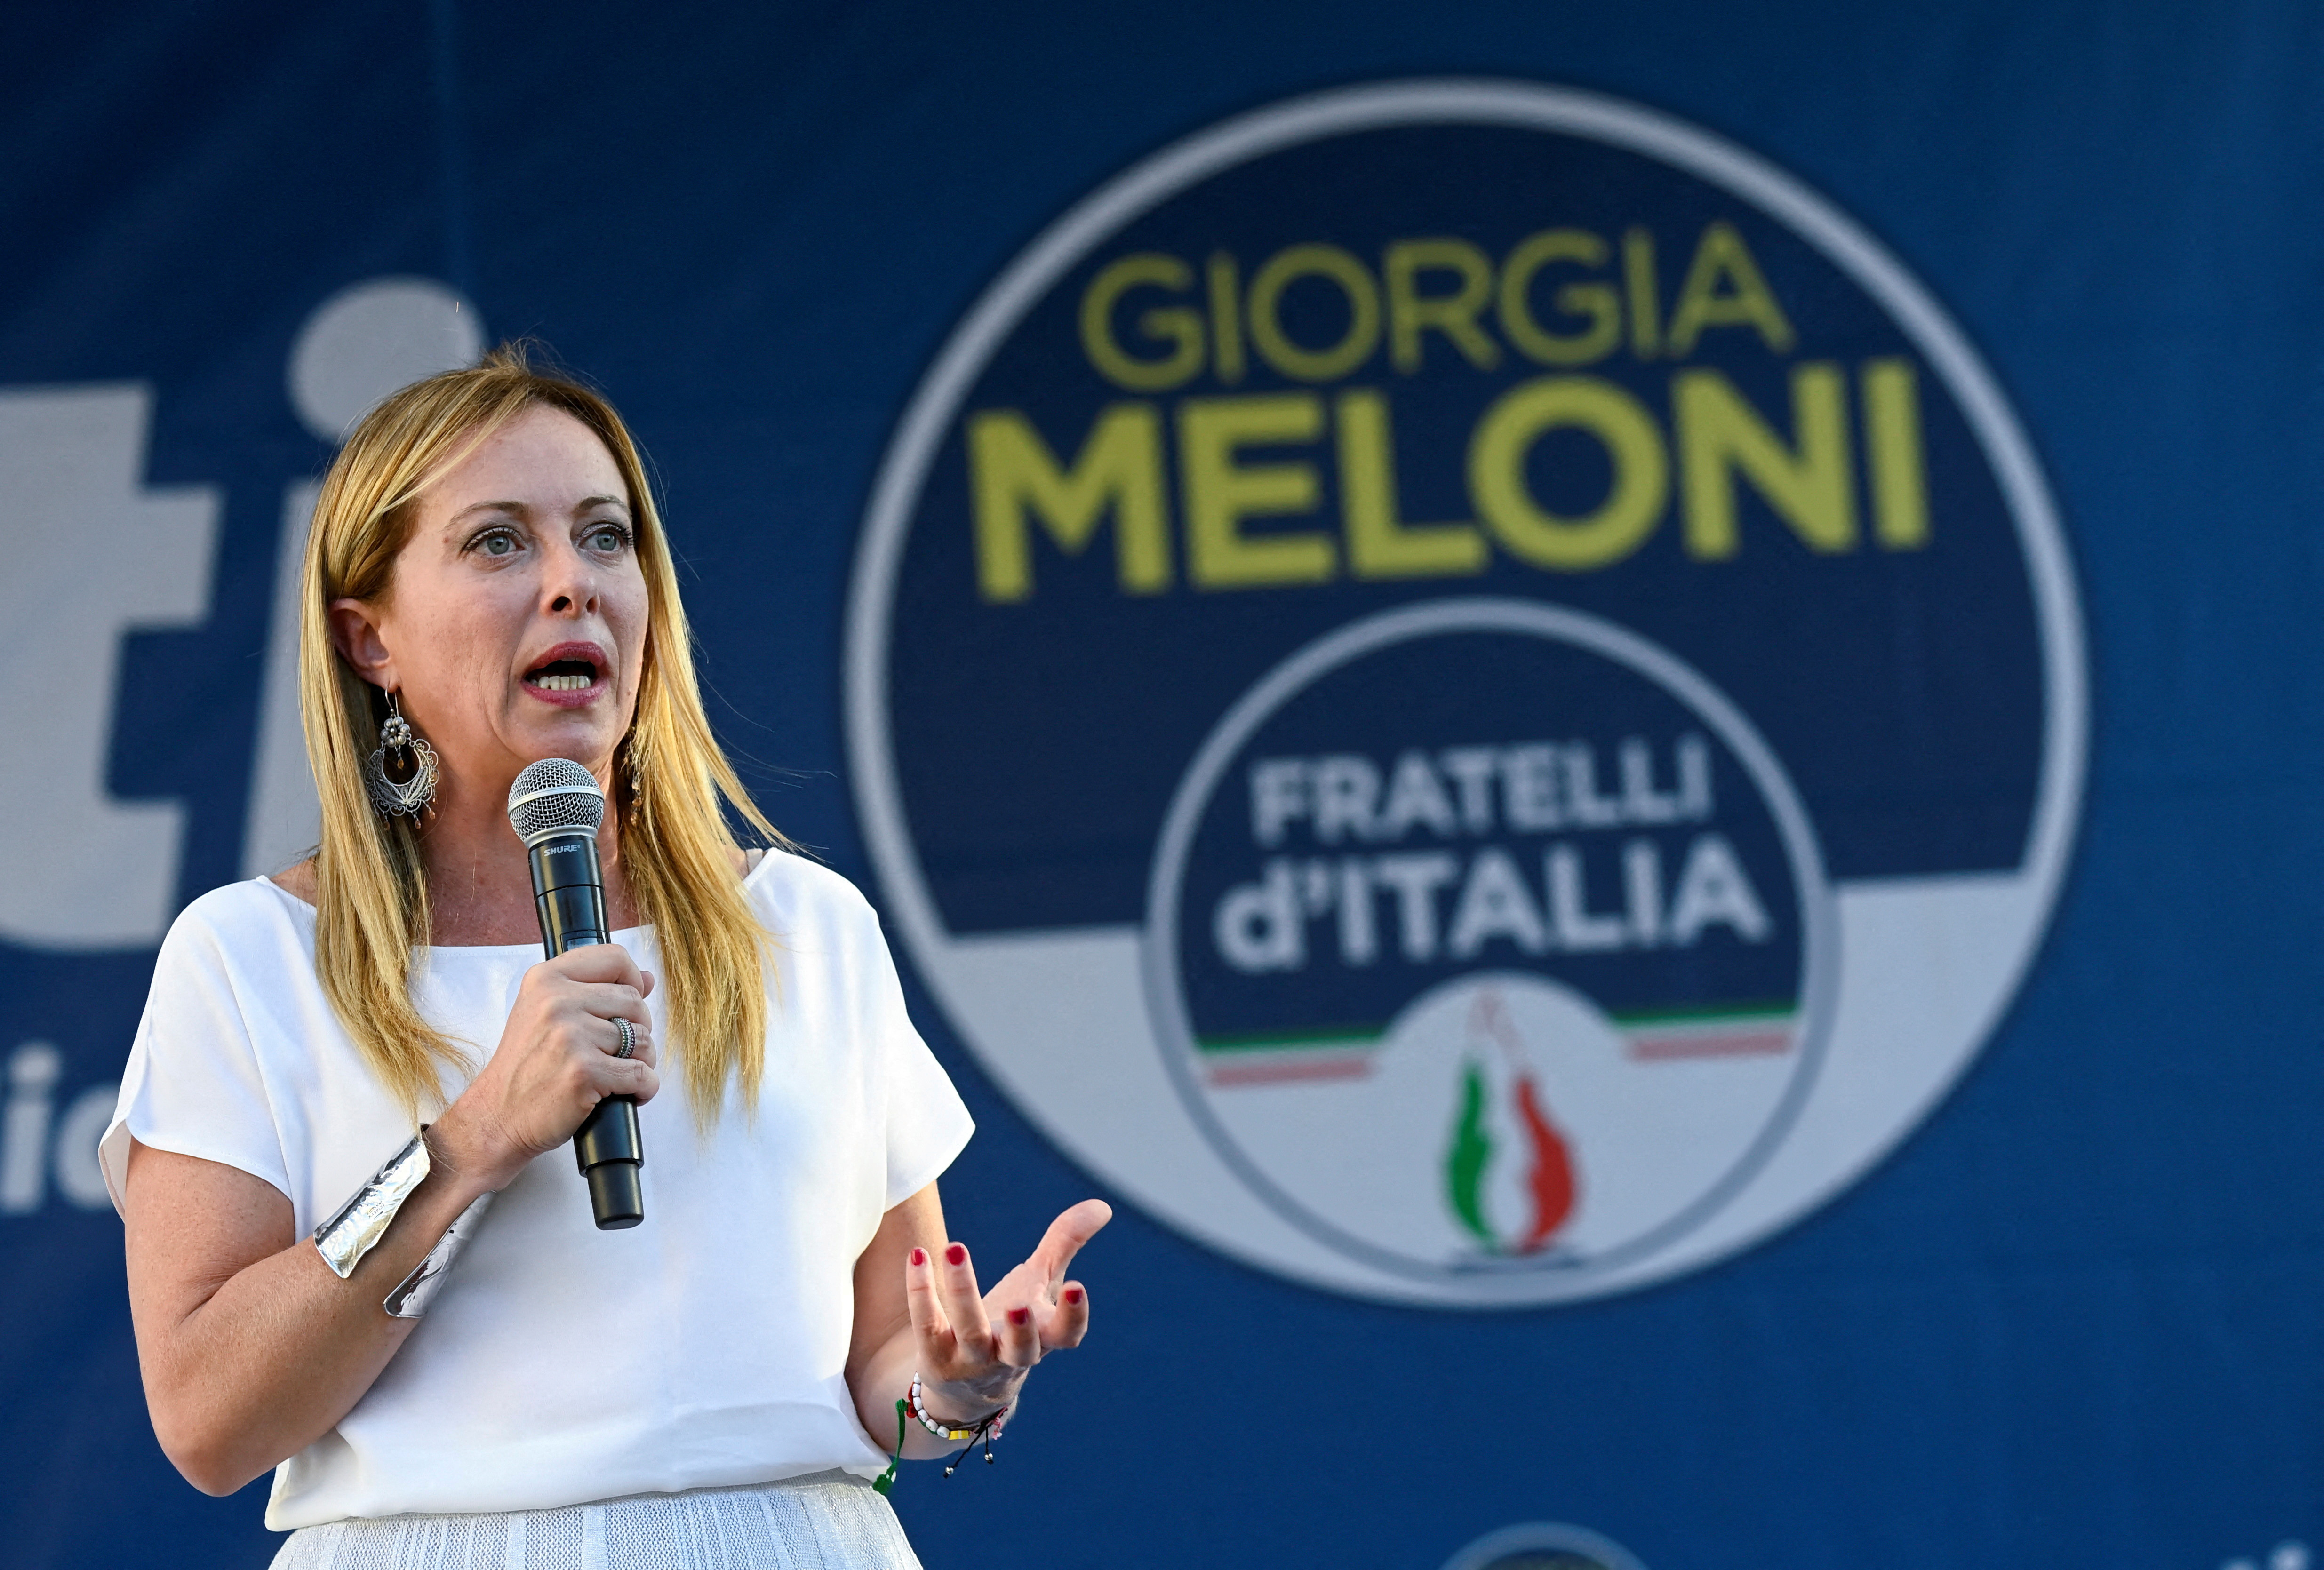 Giorgia Meloni, leader of the far-right Brothers of Italy party, attends a rally in Milan